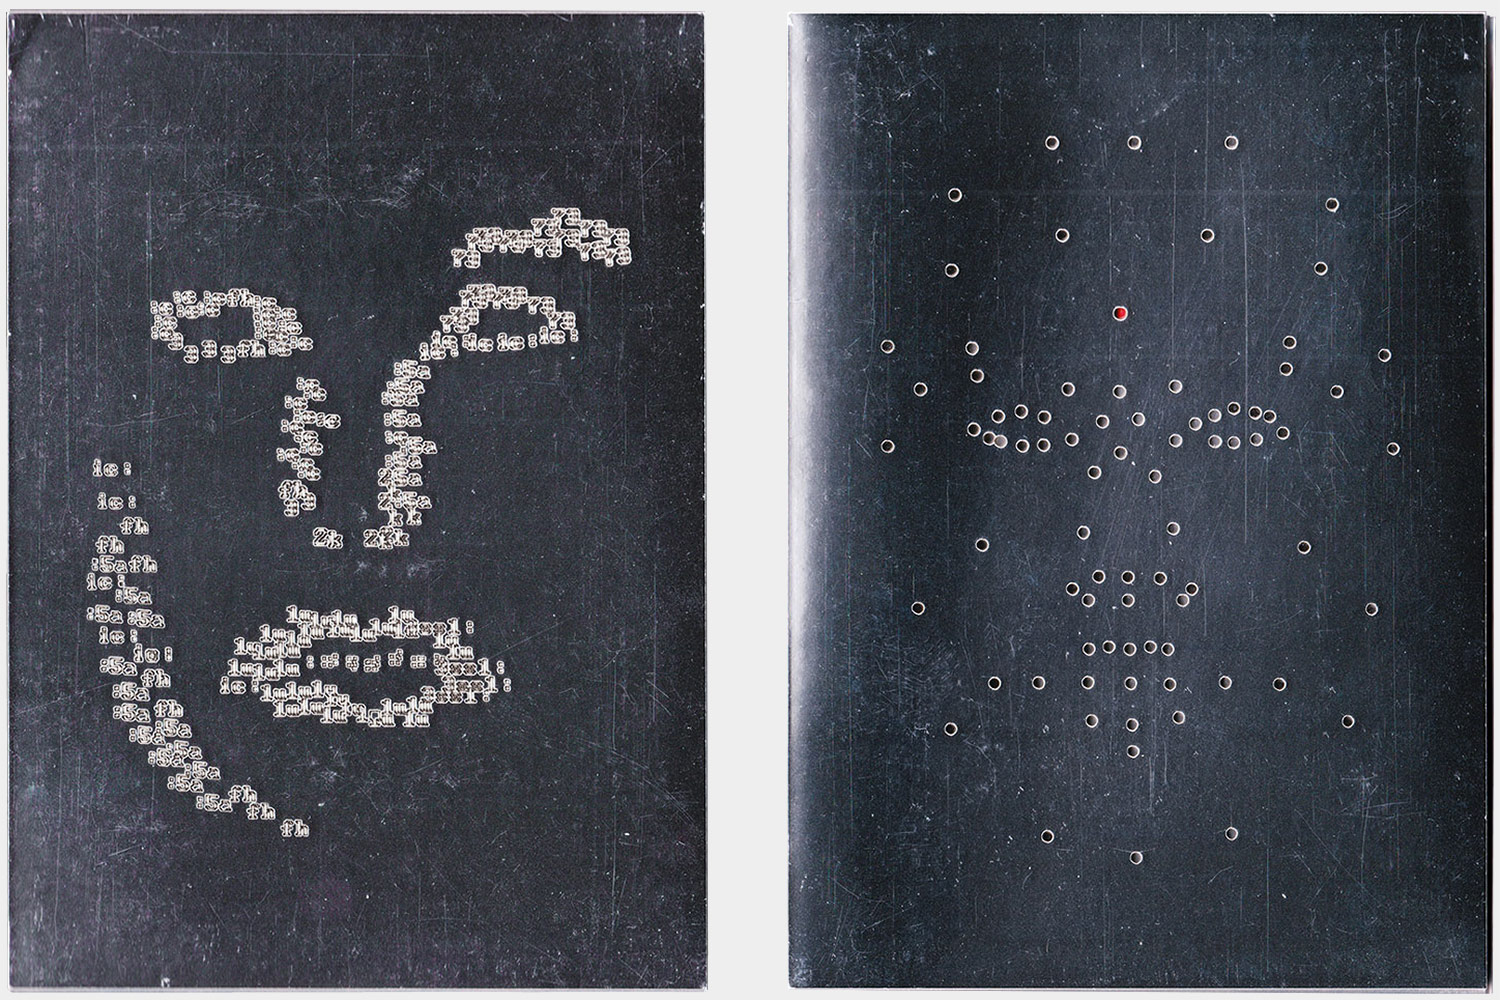 Metallic front and back covers with laser cut figures resembling a face on each cover.